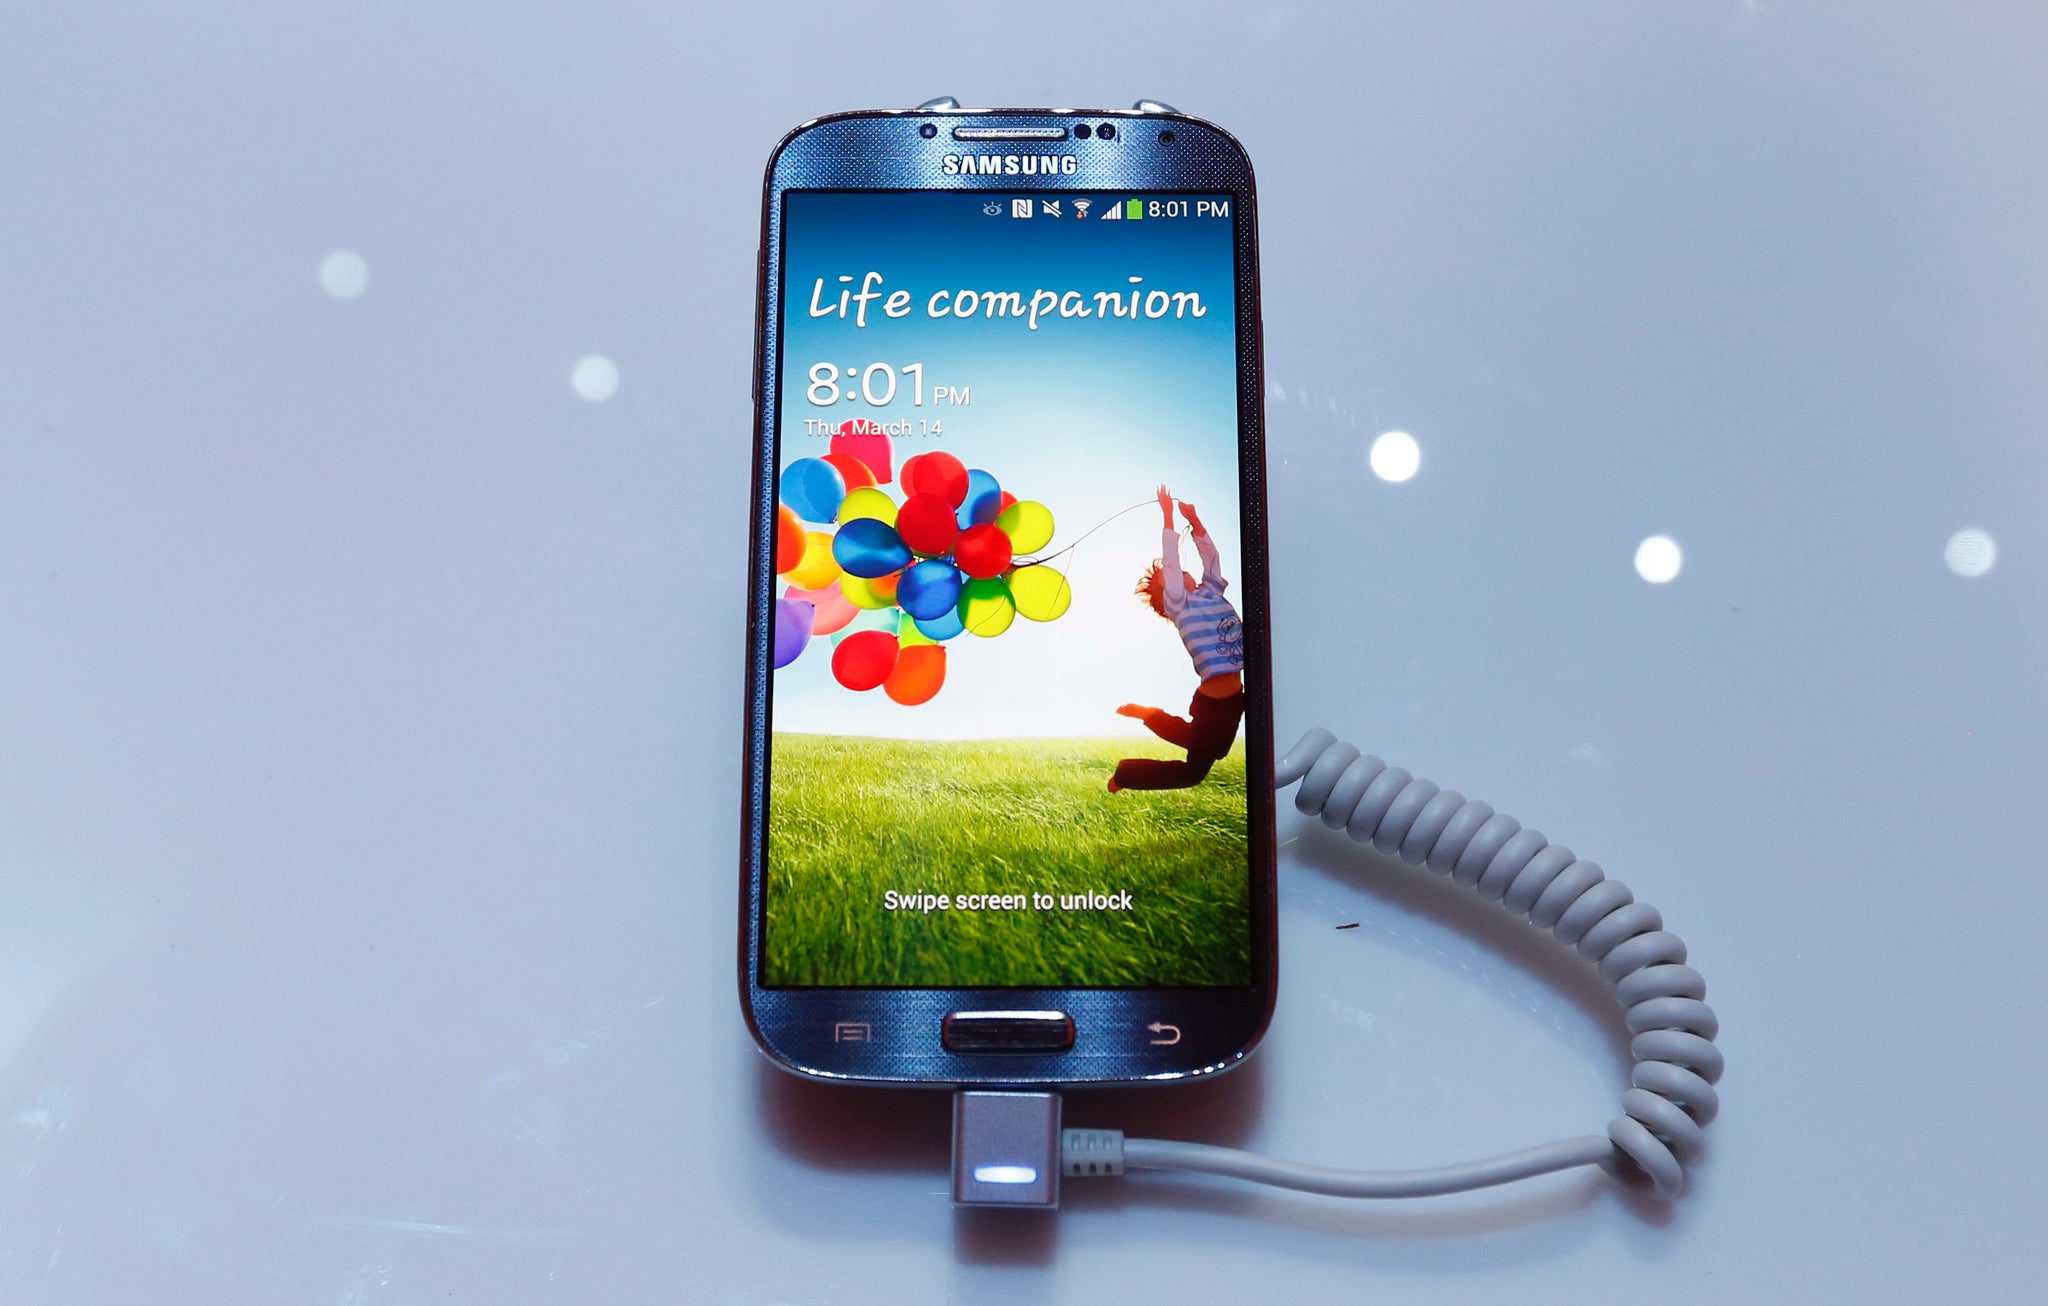 The Galaxy S4 smartphone (pictured) has sold more than 40 million units.